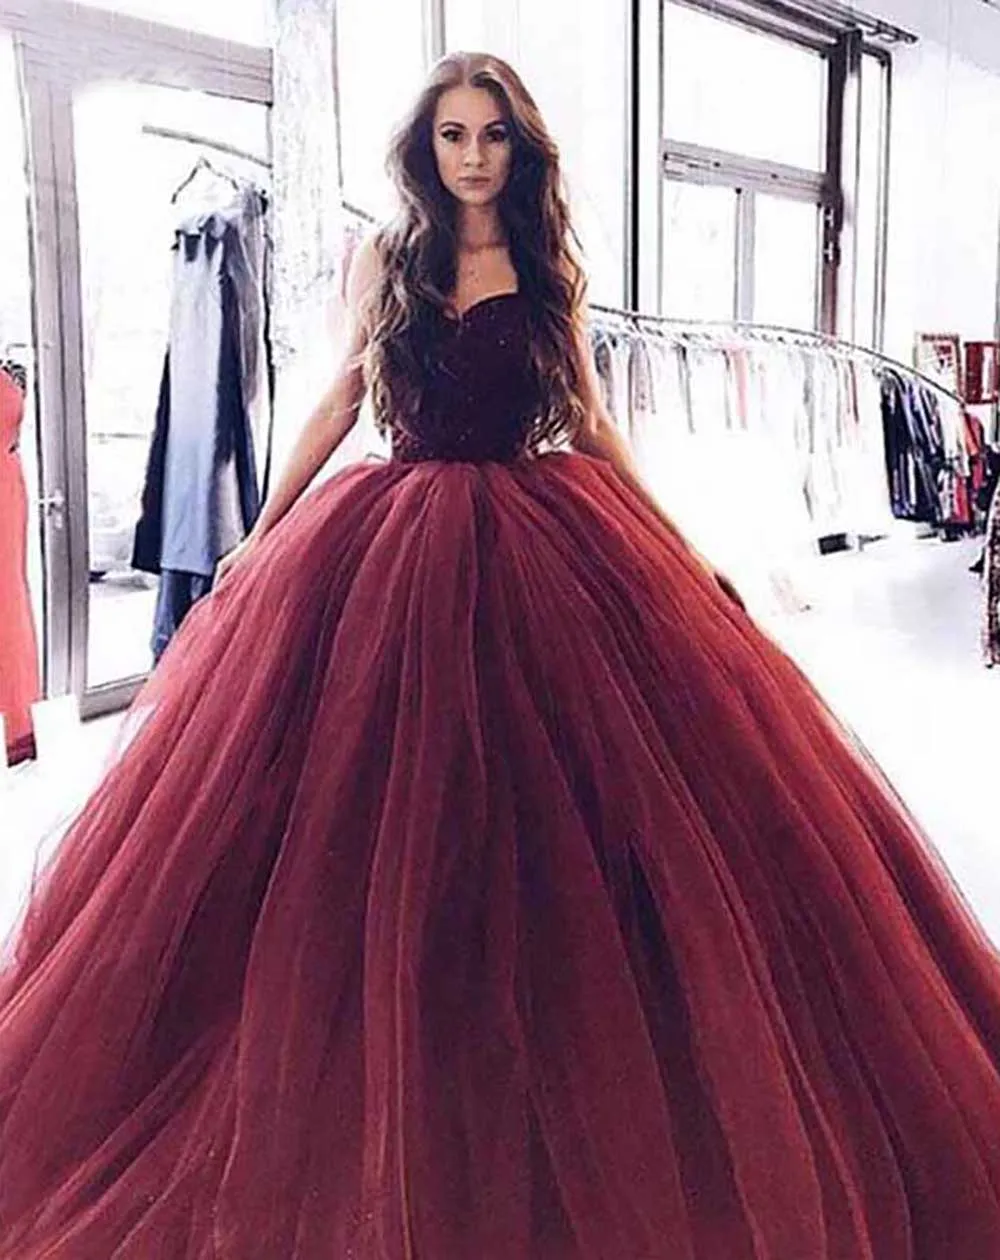 

New Sweetheart Customize Gorgeous Ball Gown Evening Dress robe soiree dubai Sweetheart Beading Gray Tulle Long Prom Dresses